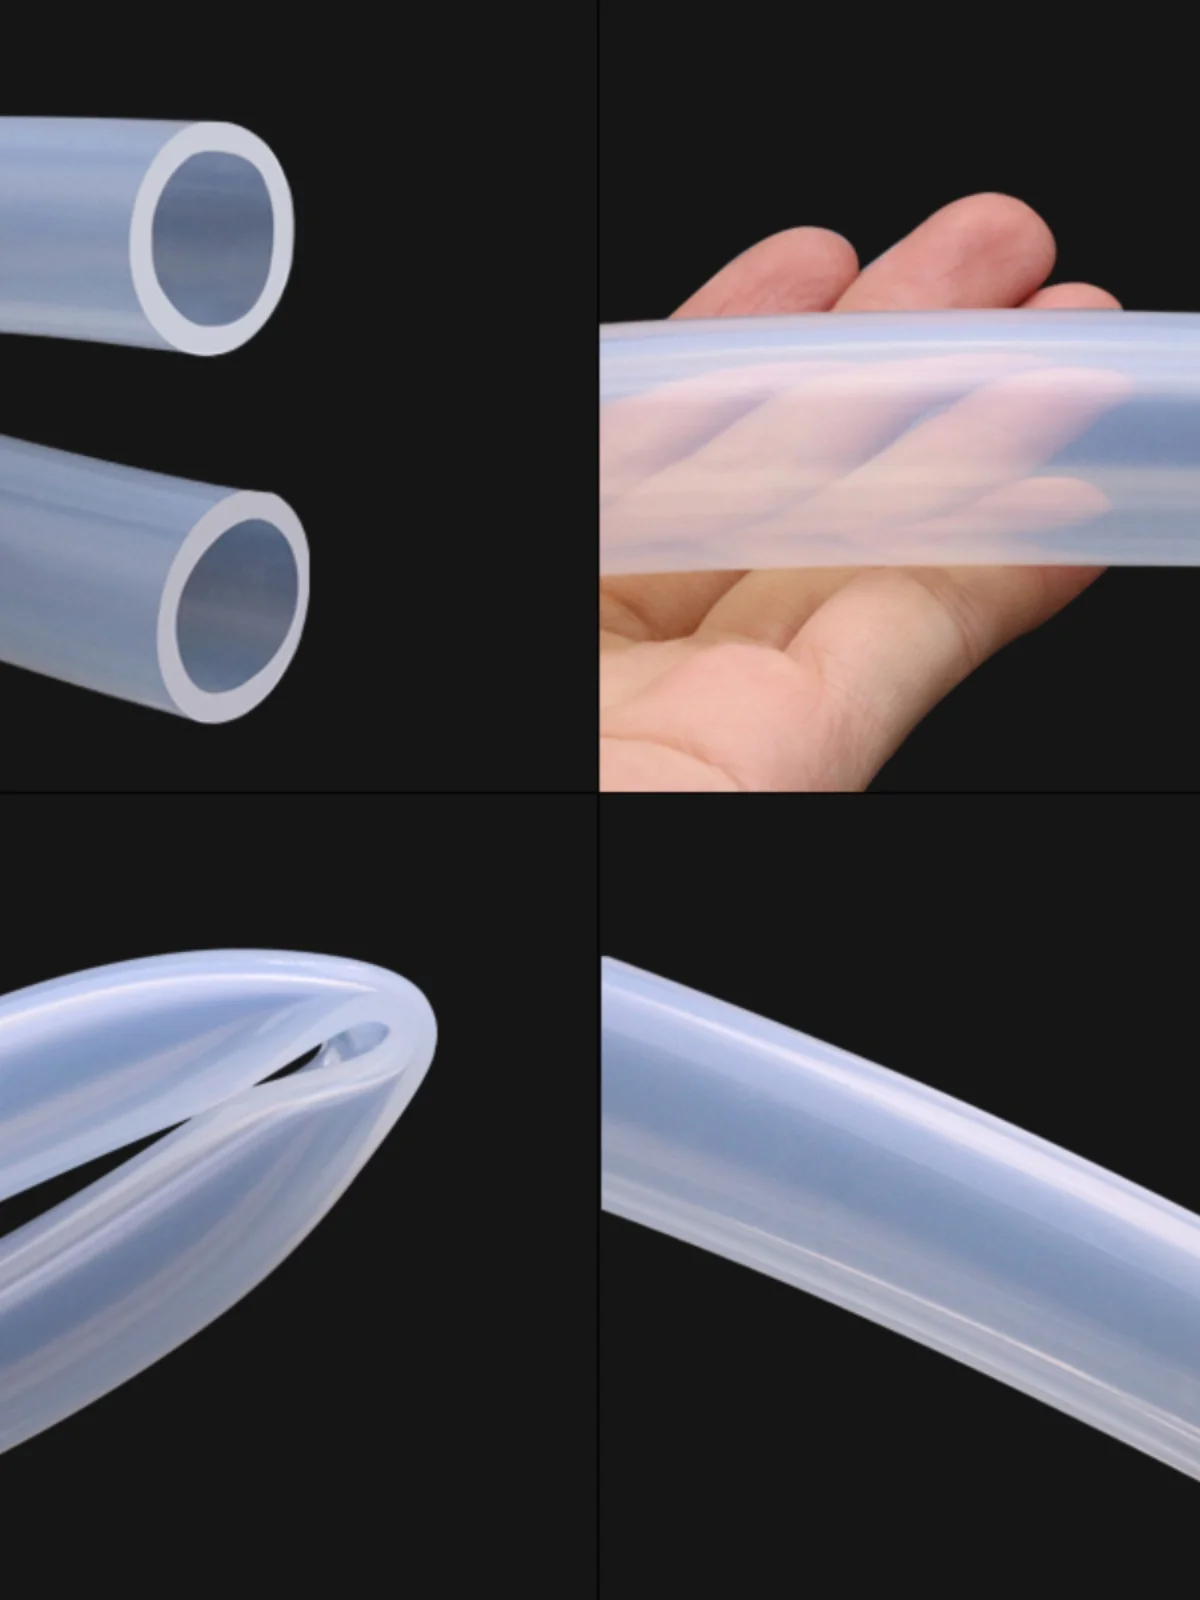 1M Food Grade Silicone Rubber Hose Transparent Flexible Silicone Tube Diameter 0.5 1 1.5 2 2.5 3 4 5 6 7 8  10  12 mm Clear Tube 1 meters food grade clear transparent silicone rubber hose id 0 51 2 3 4 5 6 7 8 9 10 mm o d flexible nontoxic silicone tube